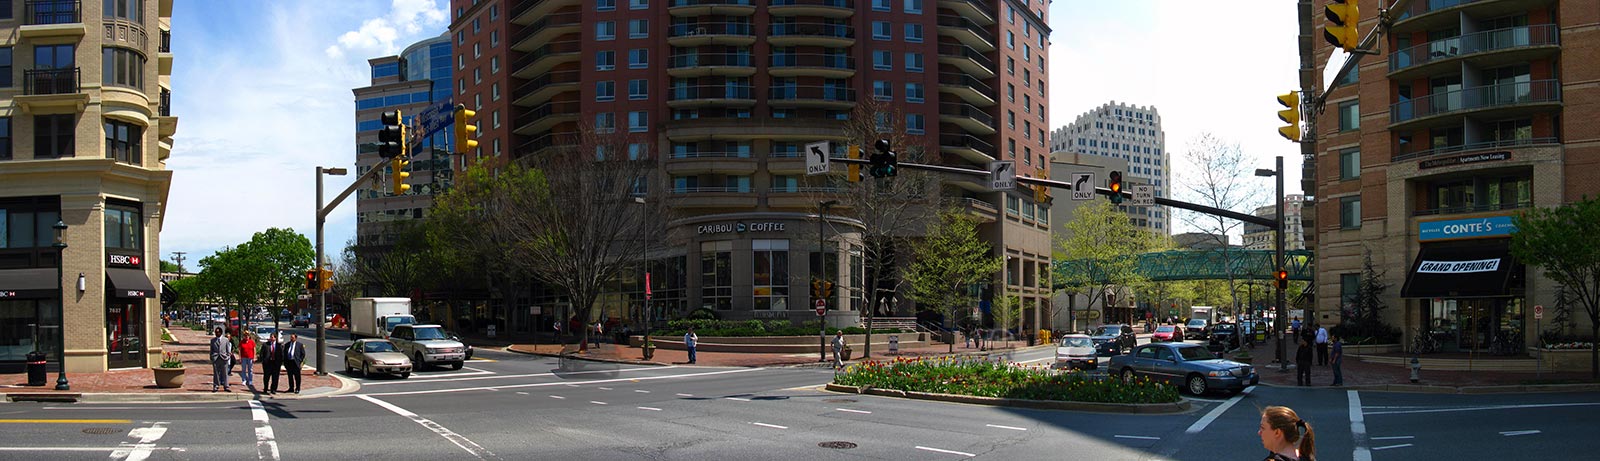 Urban communities like Downtown Bethesda are complex built environments (Copyright: thisisbossi@flickr)